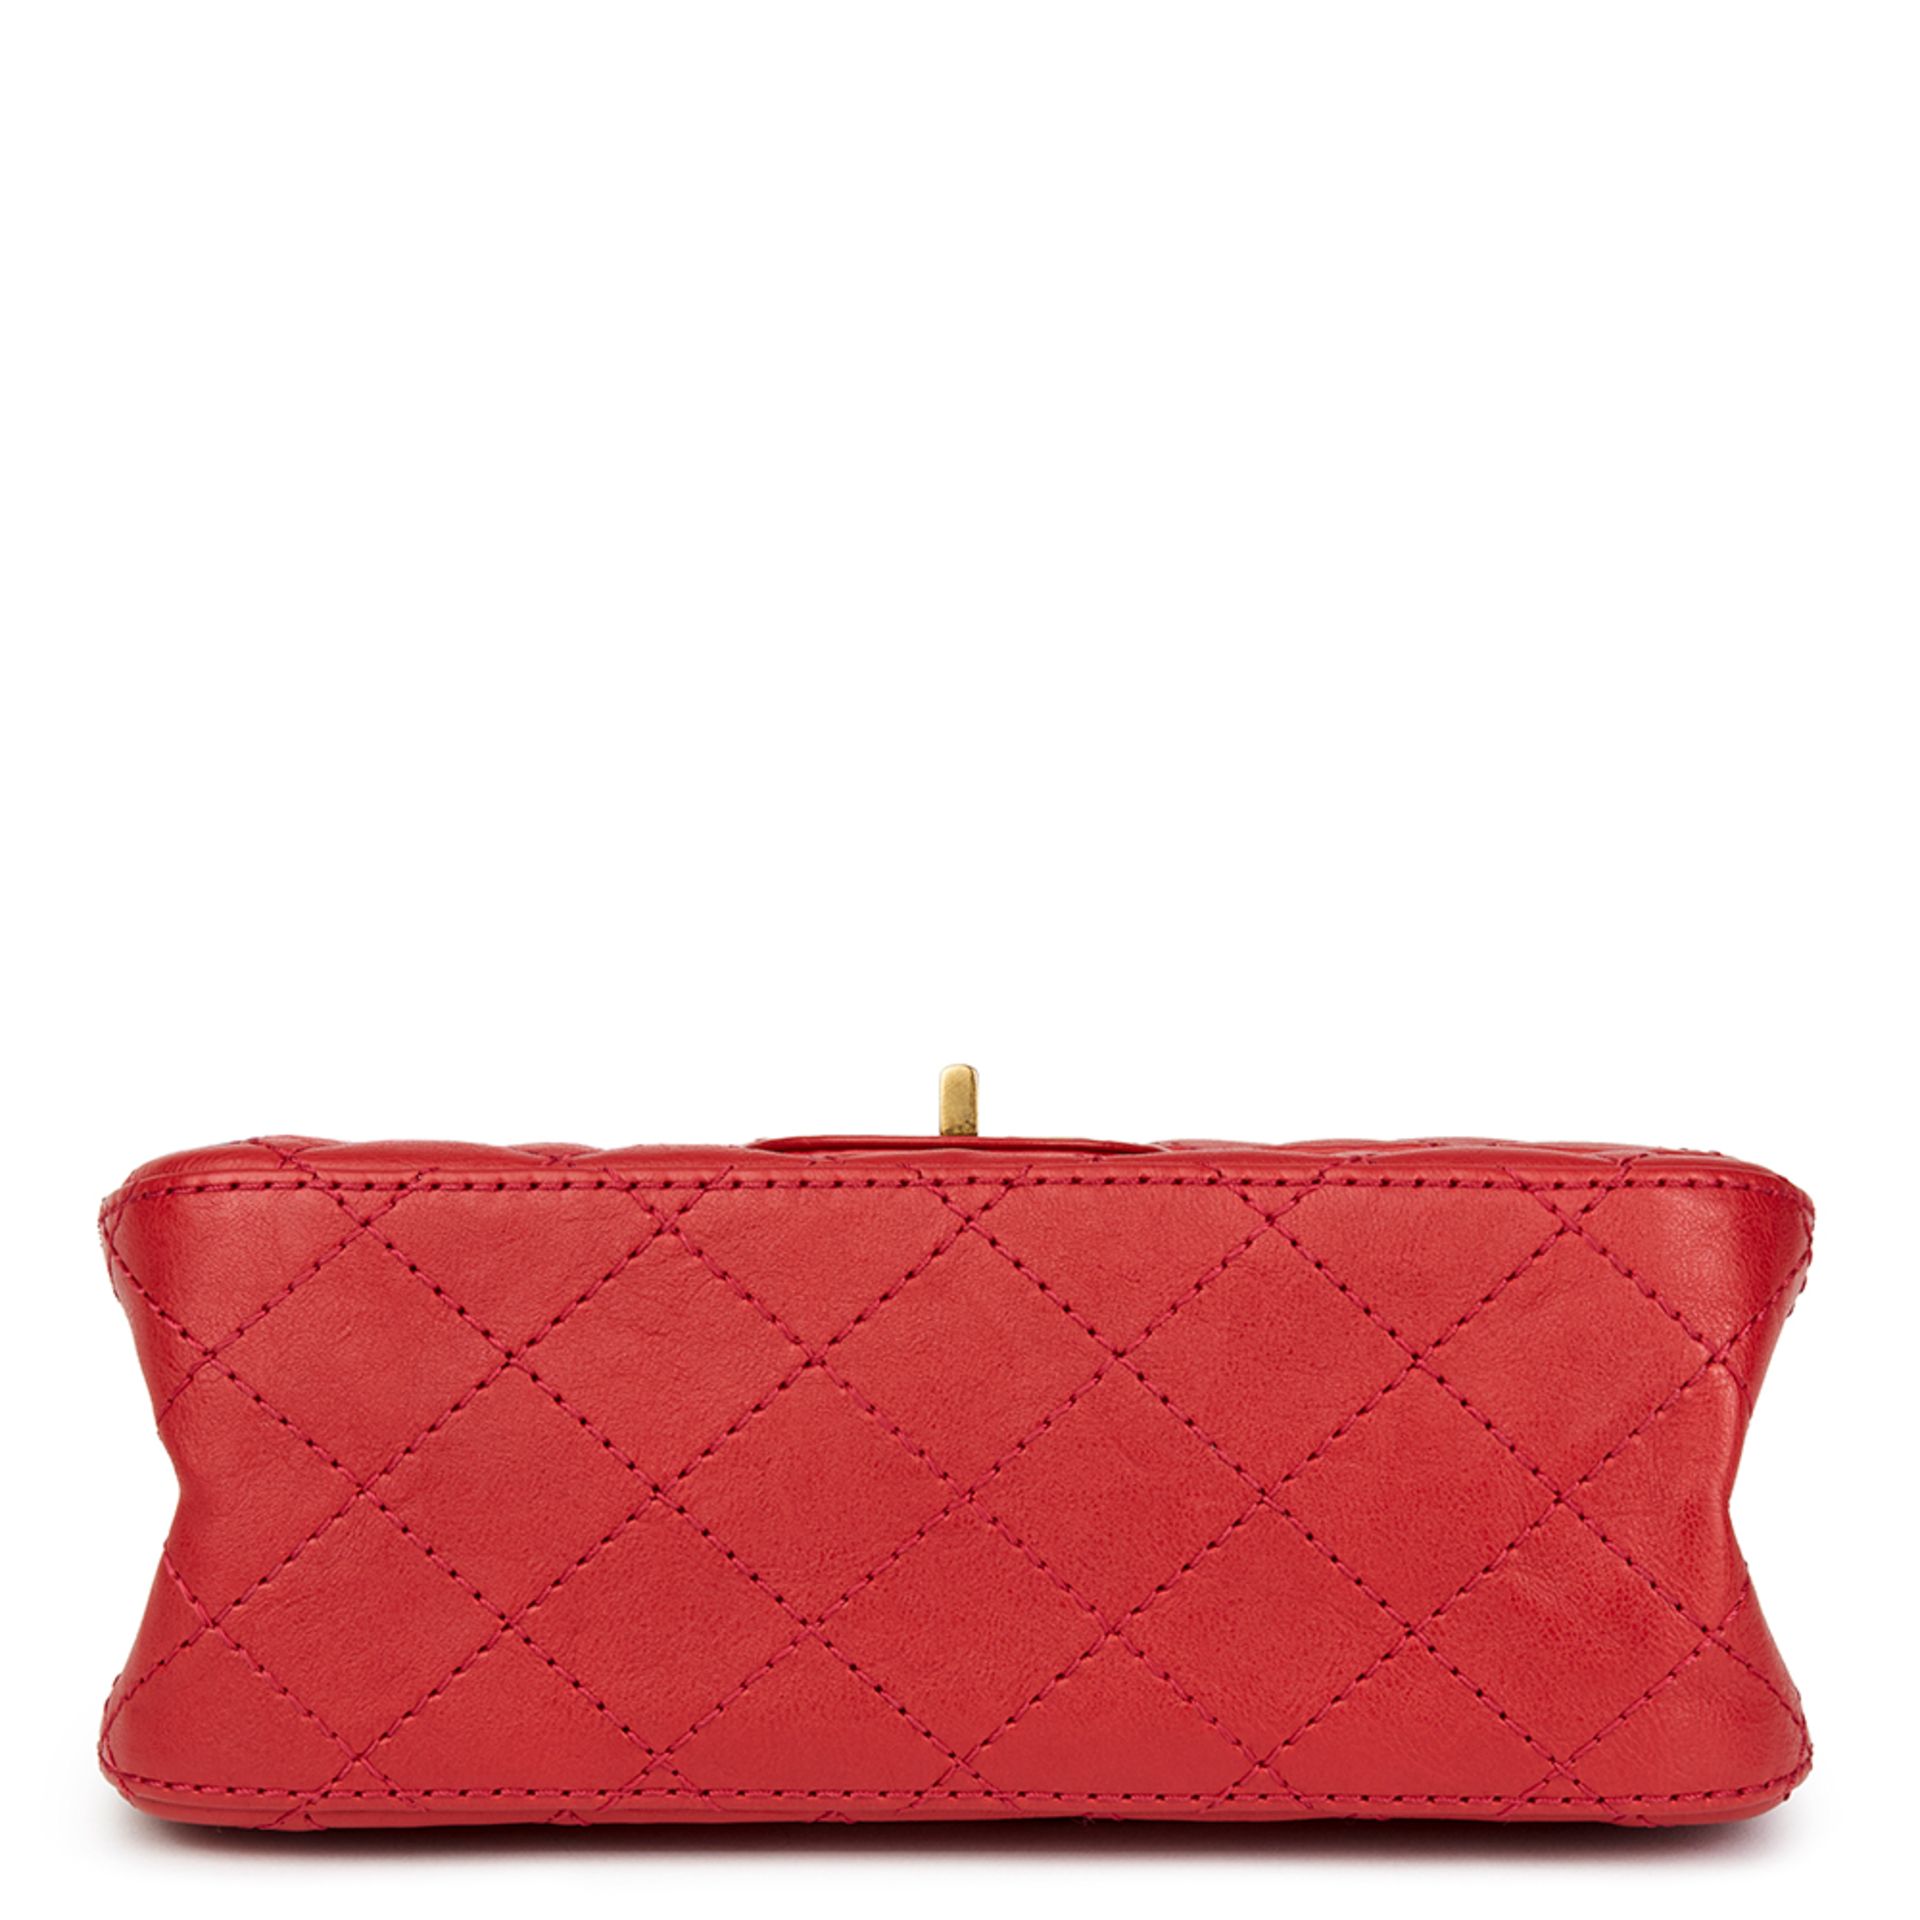 Chanel Red Quilted Calfskin Leather 2.55 Reissue 224 Double Flap Bag - Bild 5 aus 10